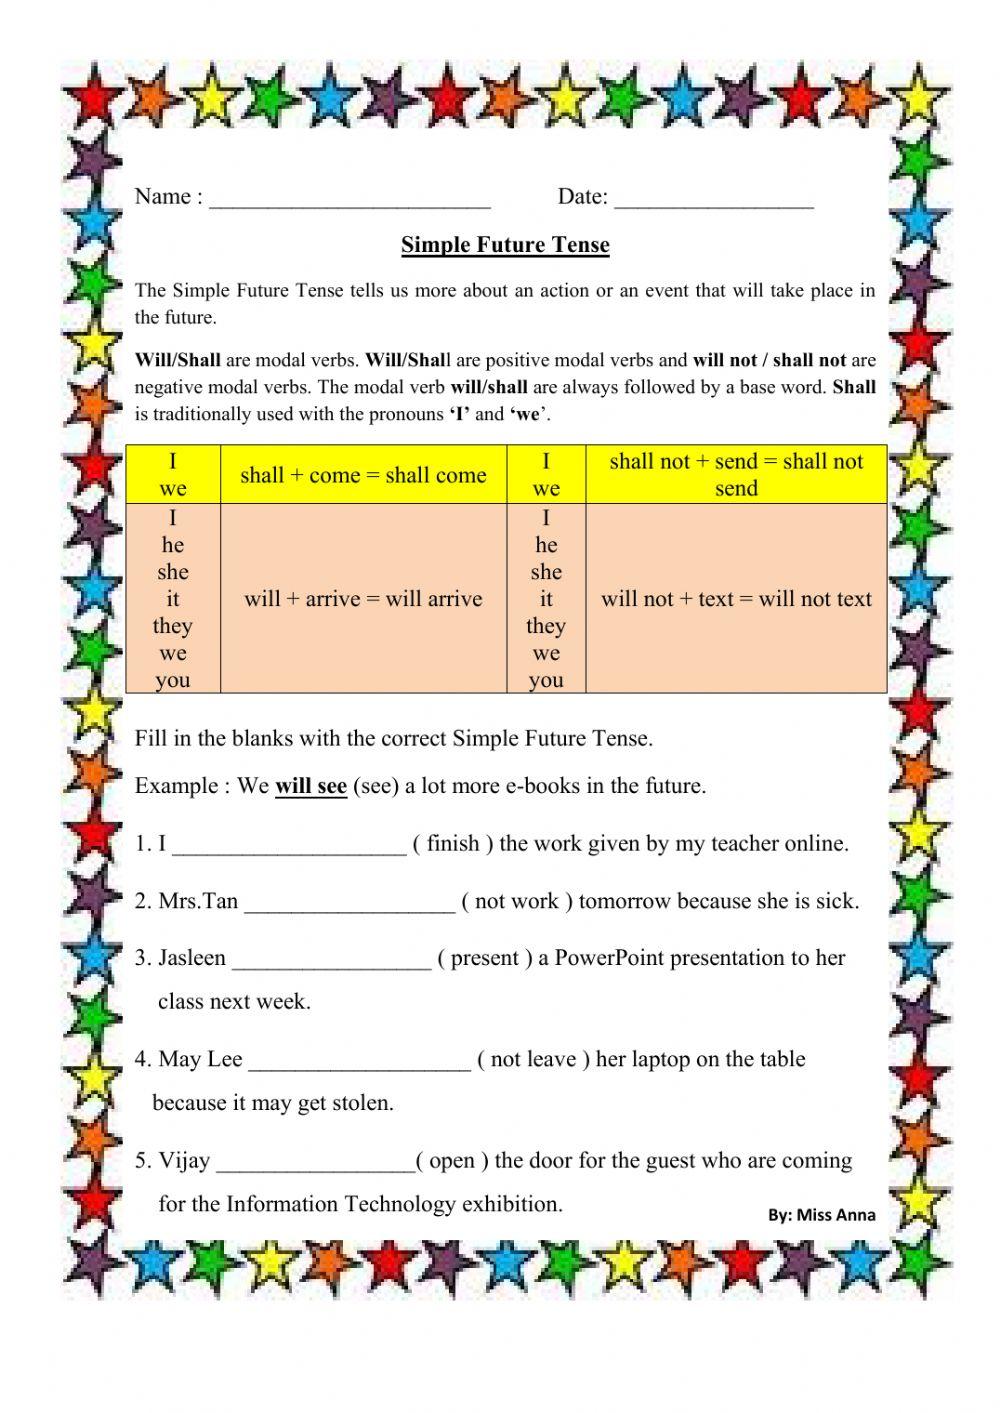 The Simple Future Tense Year 5